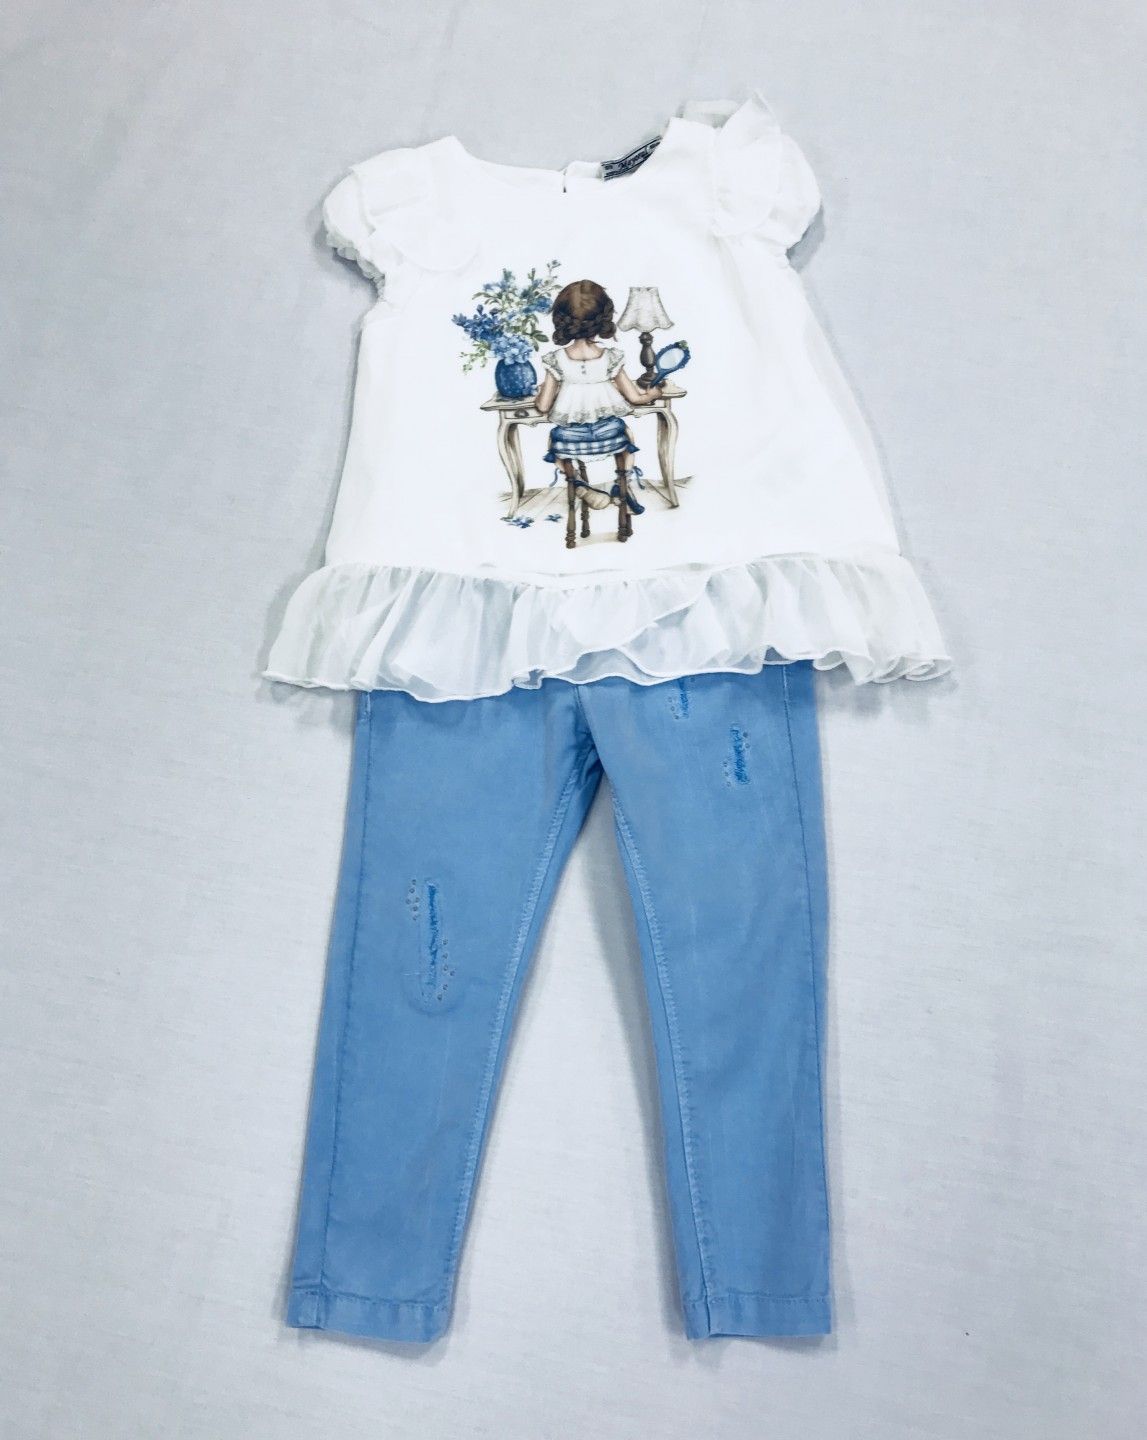 3187 WHITE BLOUSE AND LIGHT BLUE JEANS 2-PIECE SET. SIZES 2-5.